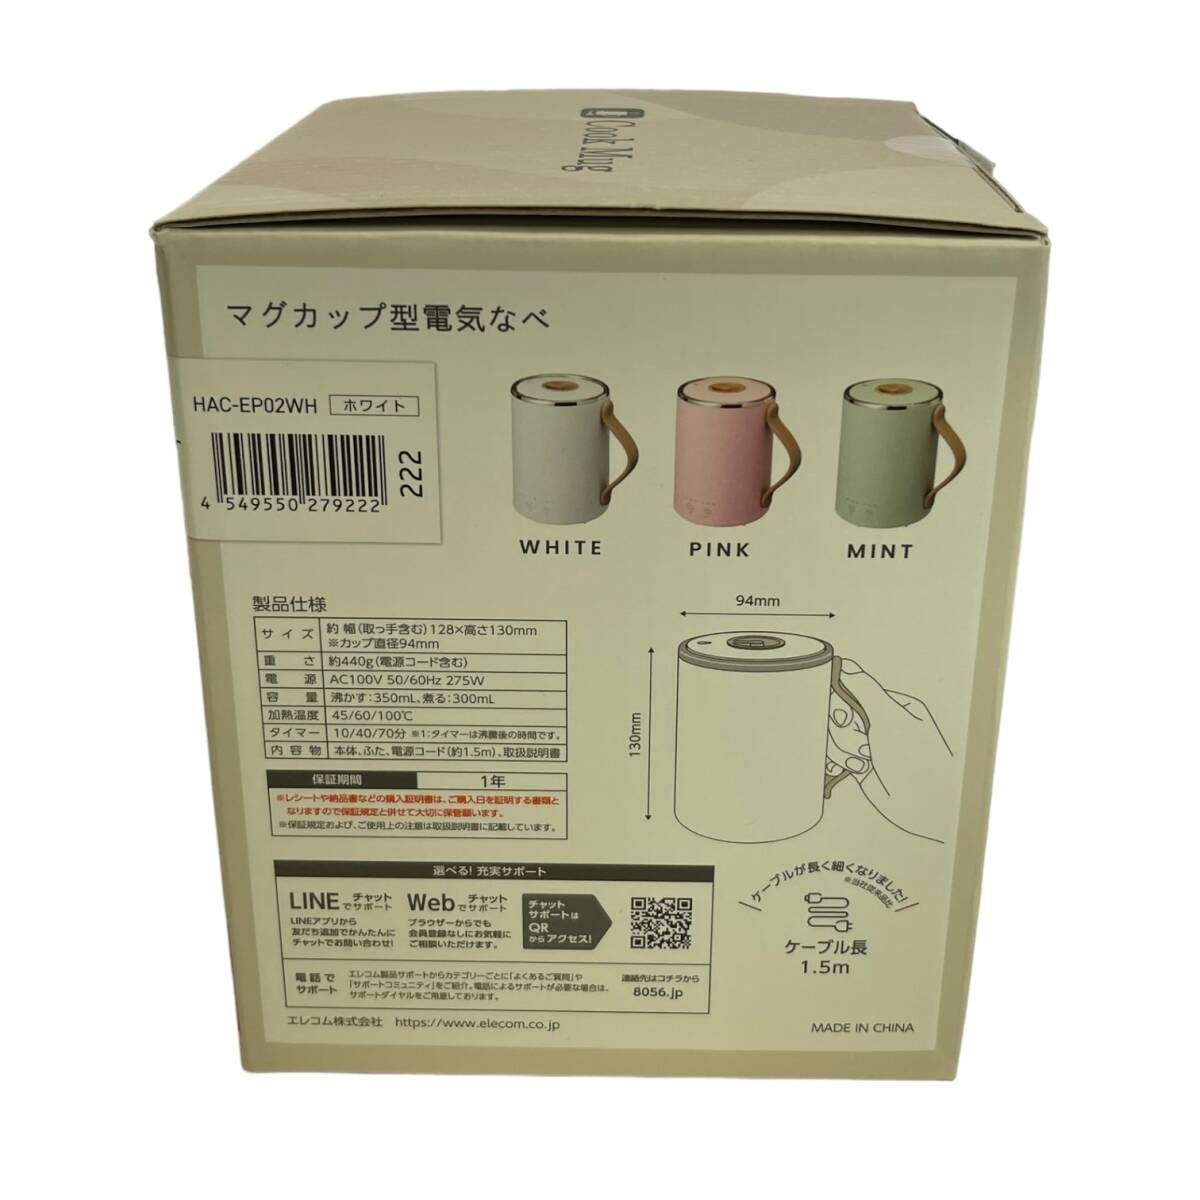 [ secondhand goods ] Elecom mug type electric pan electric kettle soup Manufacturers HAC-EP02WH Cook Mug Cook mug 350ml white box equipped A62984RZZ